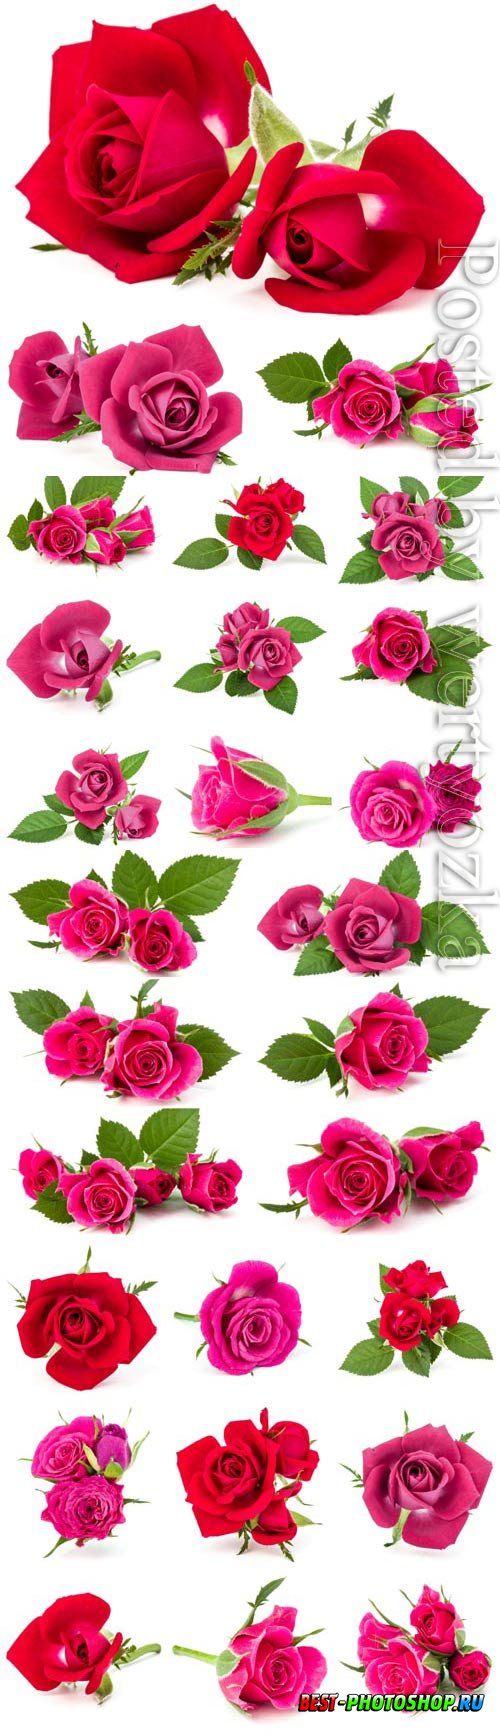 Red and pink roses on white background stock photo